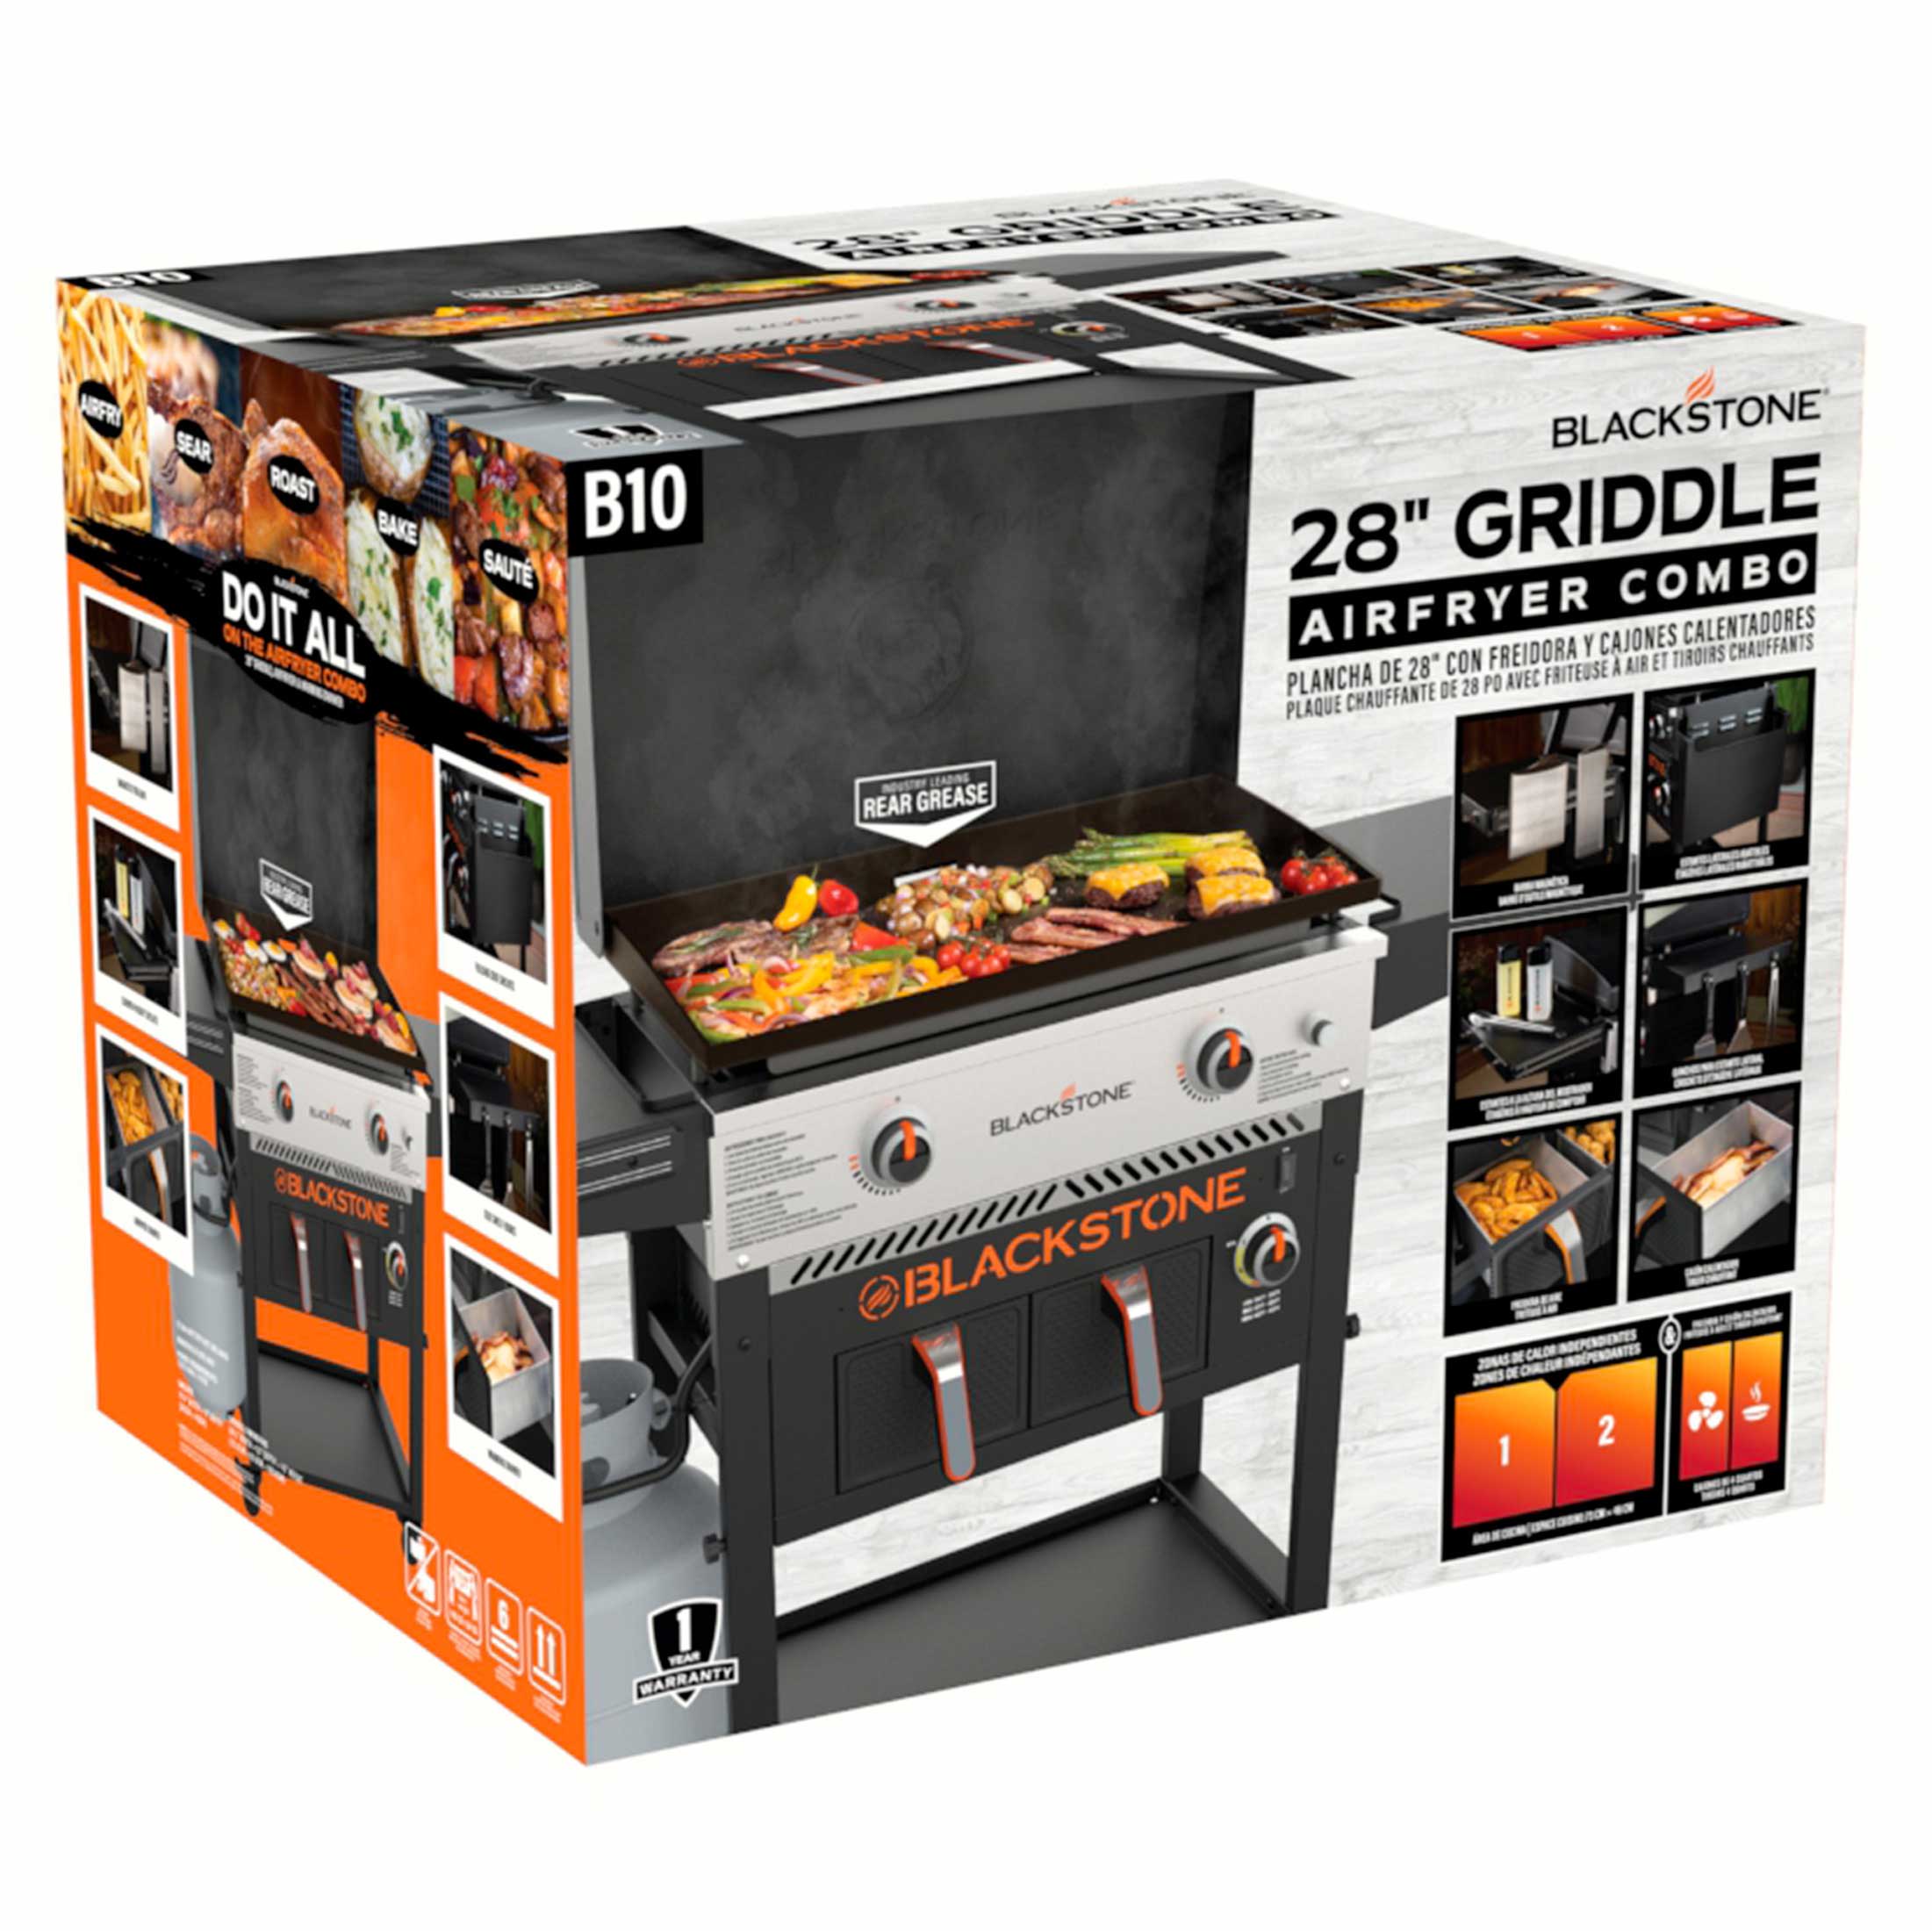 Blackstone 2-Burner 28" Propane Griddle with Air Fryer Combo - image 4 of 17